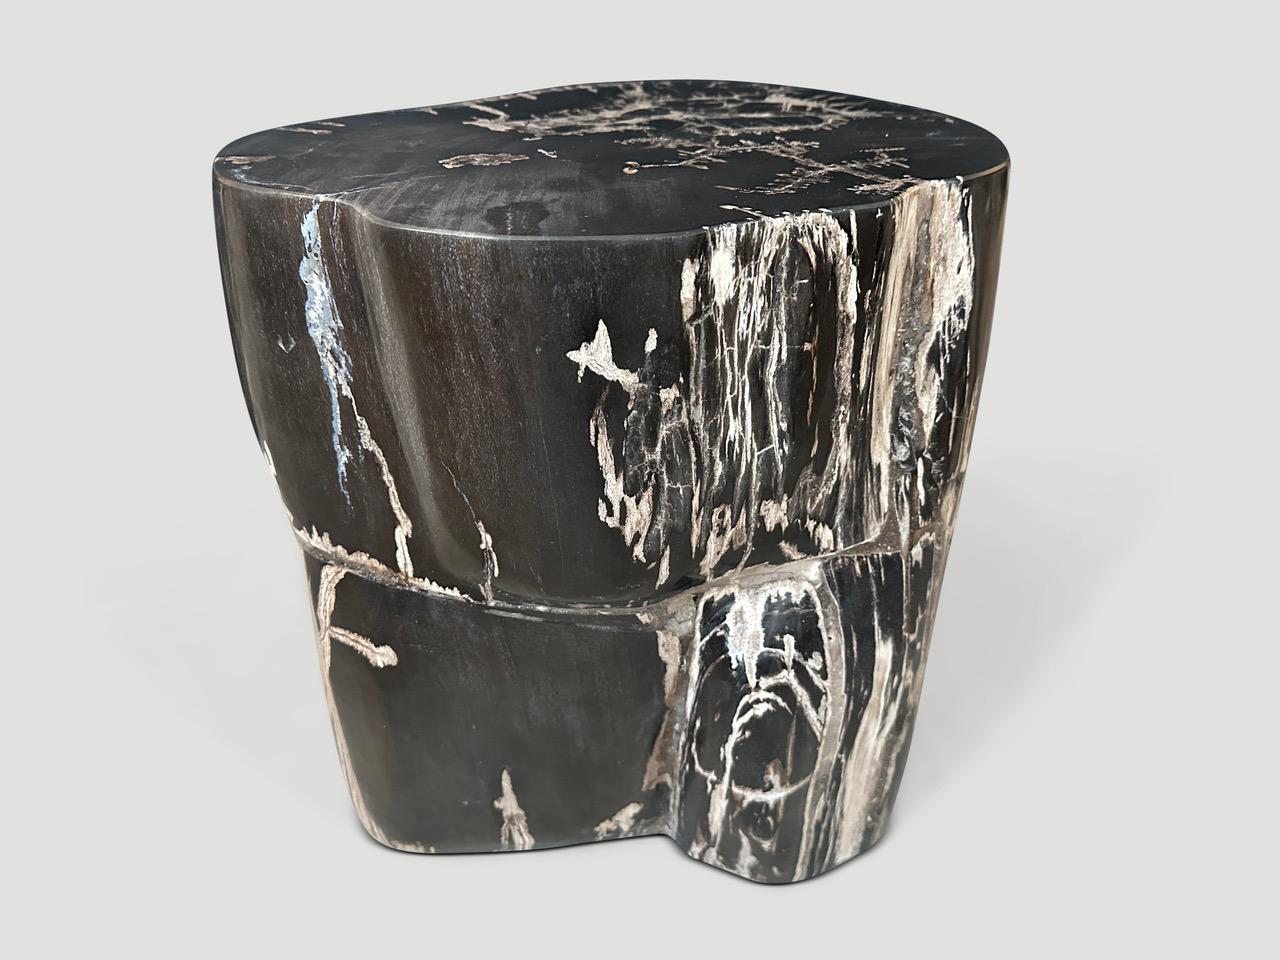 Organic Modern Andrianna Shamaris Black and White Petrified Wood Side Table For Sale